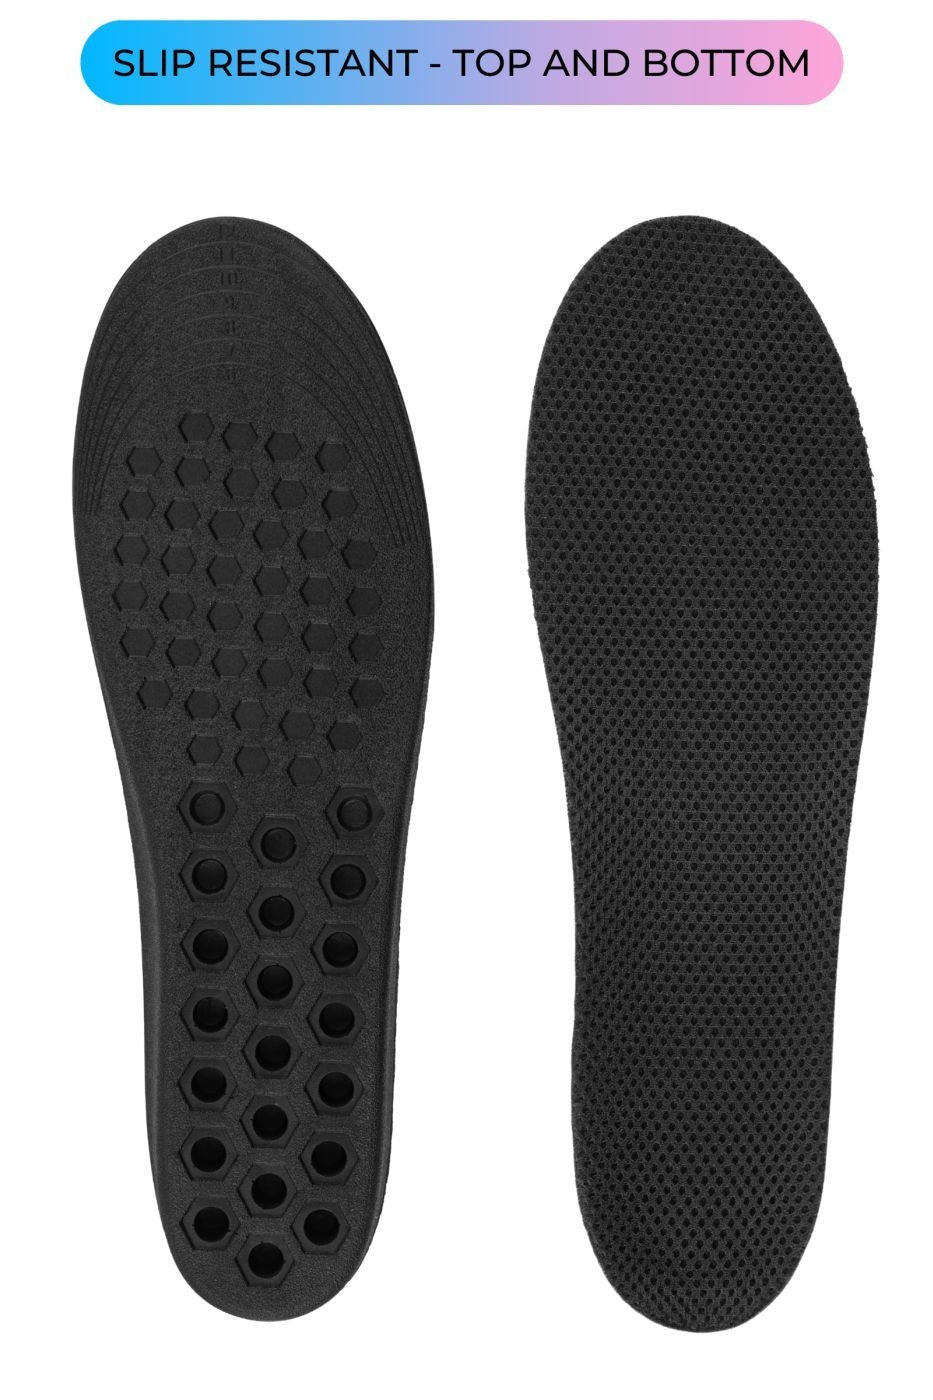 Elevator shoes height increase Breathable Comfort with One-Inch Lifting Shoe Inserts - IK206